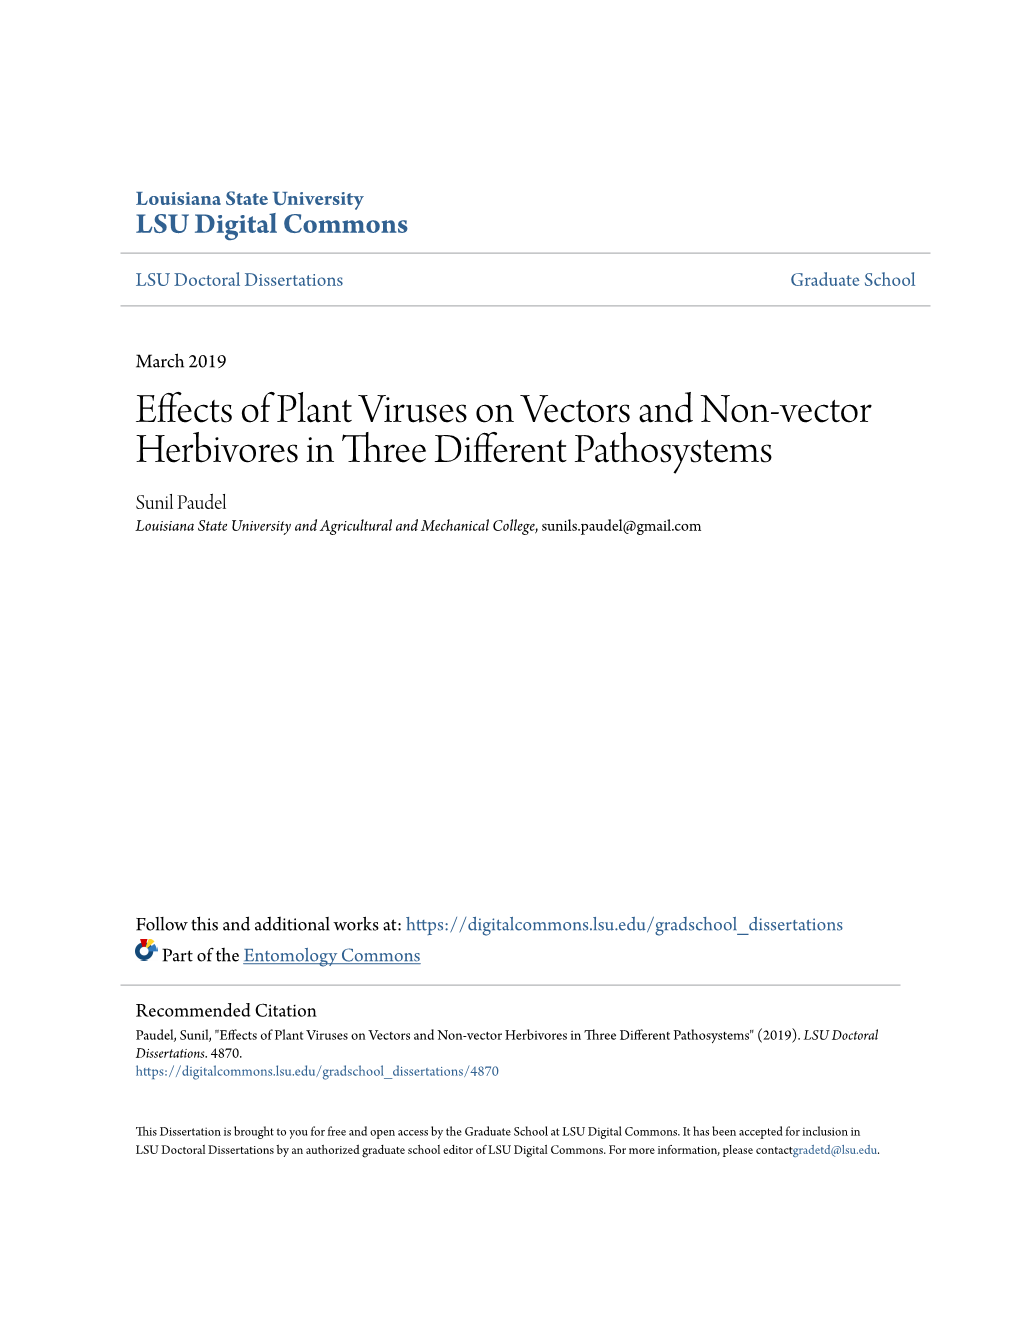 Effects of Plant Viruses on Vectors and Non-Vector Herbivores in Three